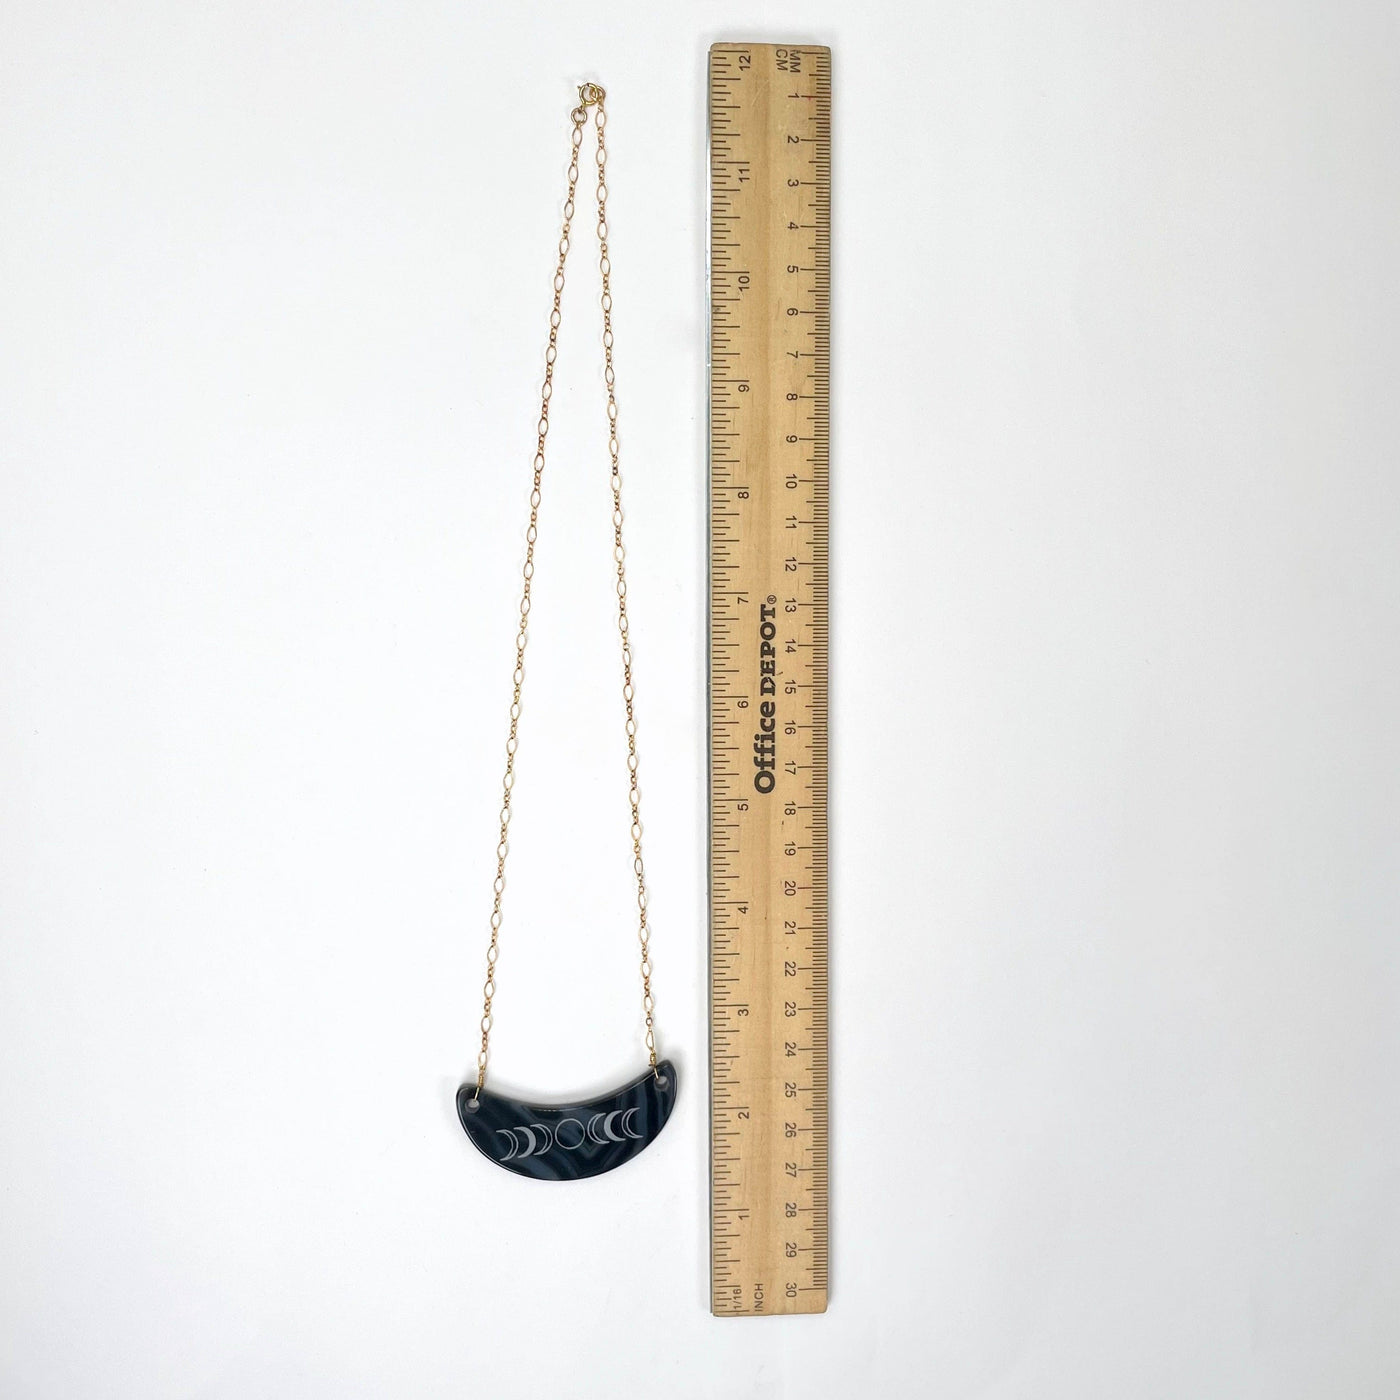 full length of dark blue agate crescent pendant necklace with moon phase with ruler for size reference